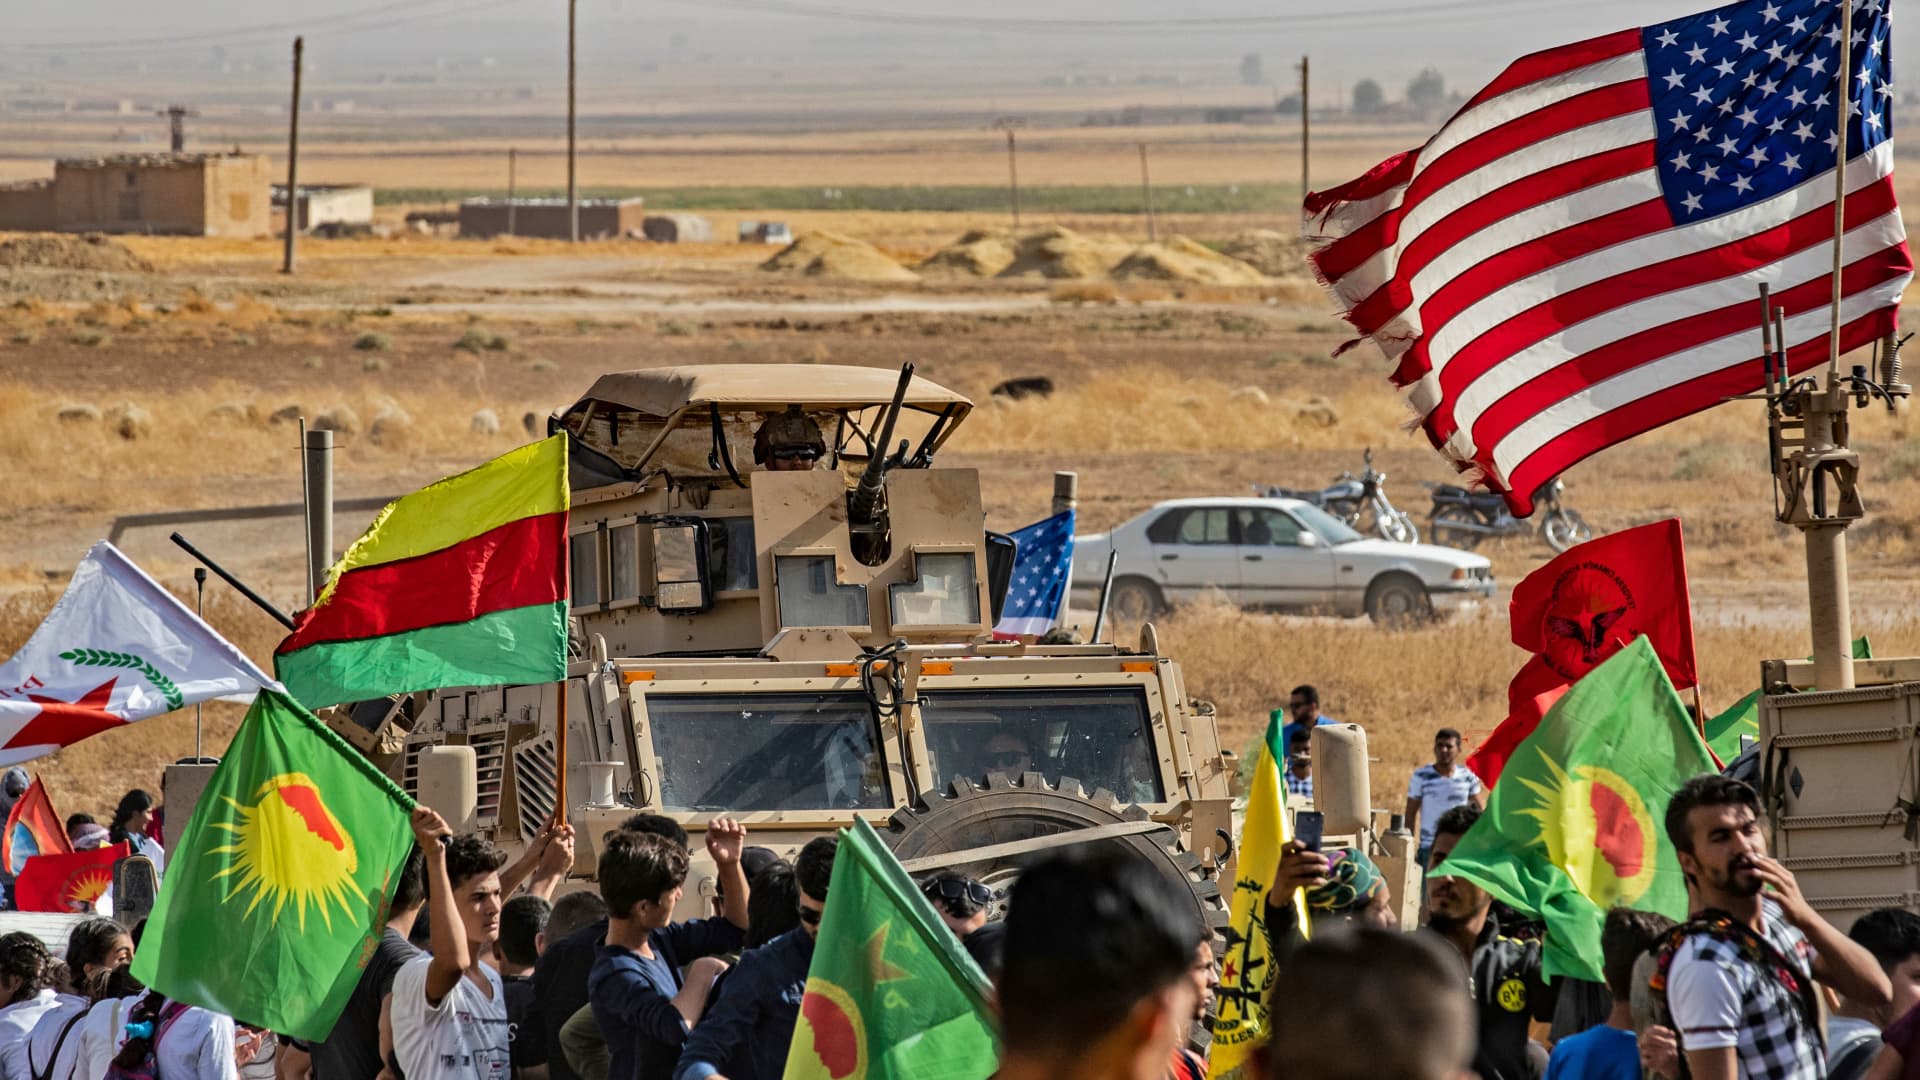 Syrian Kurds gather around a US armoured vehicle during a demonstration against Turkish threats next to a base for the US-led international coalition on the outskirts of Ras al-Ain town in Syria's Hasakeh province near the Turkish border on October 6, 2019.